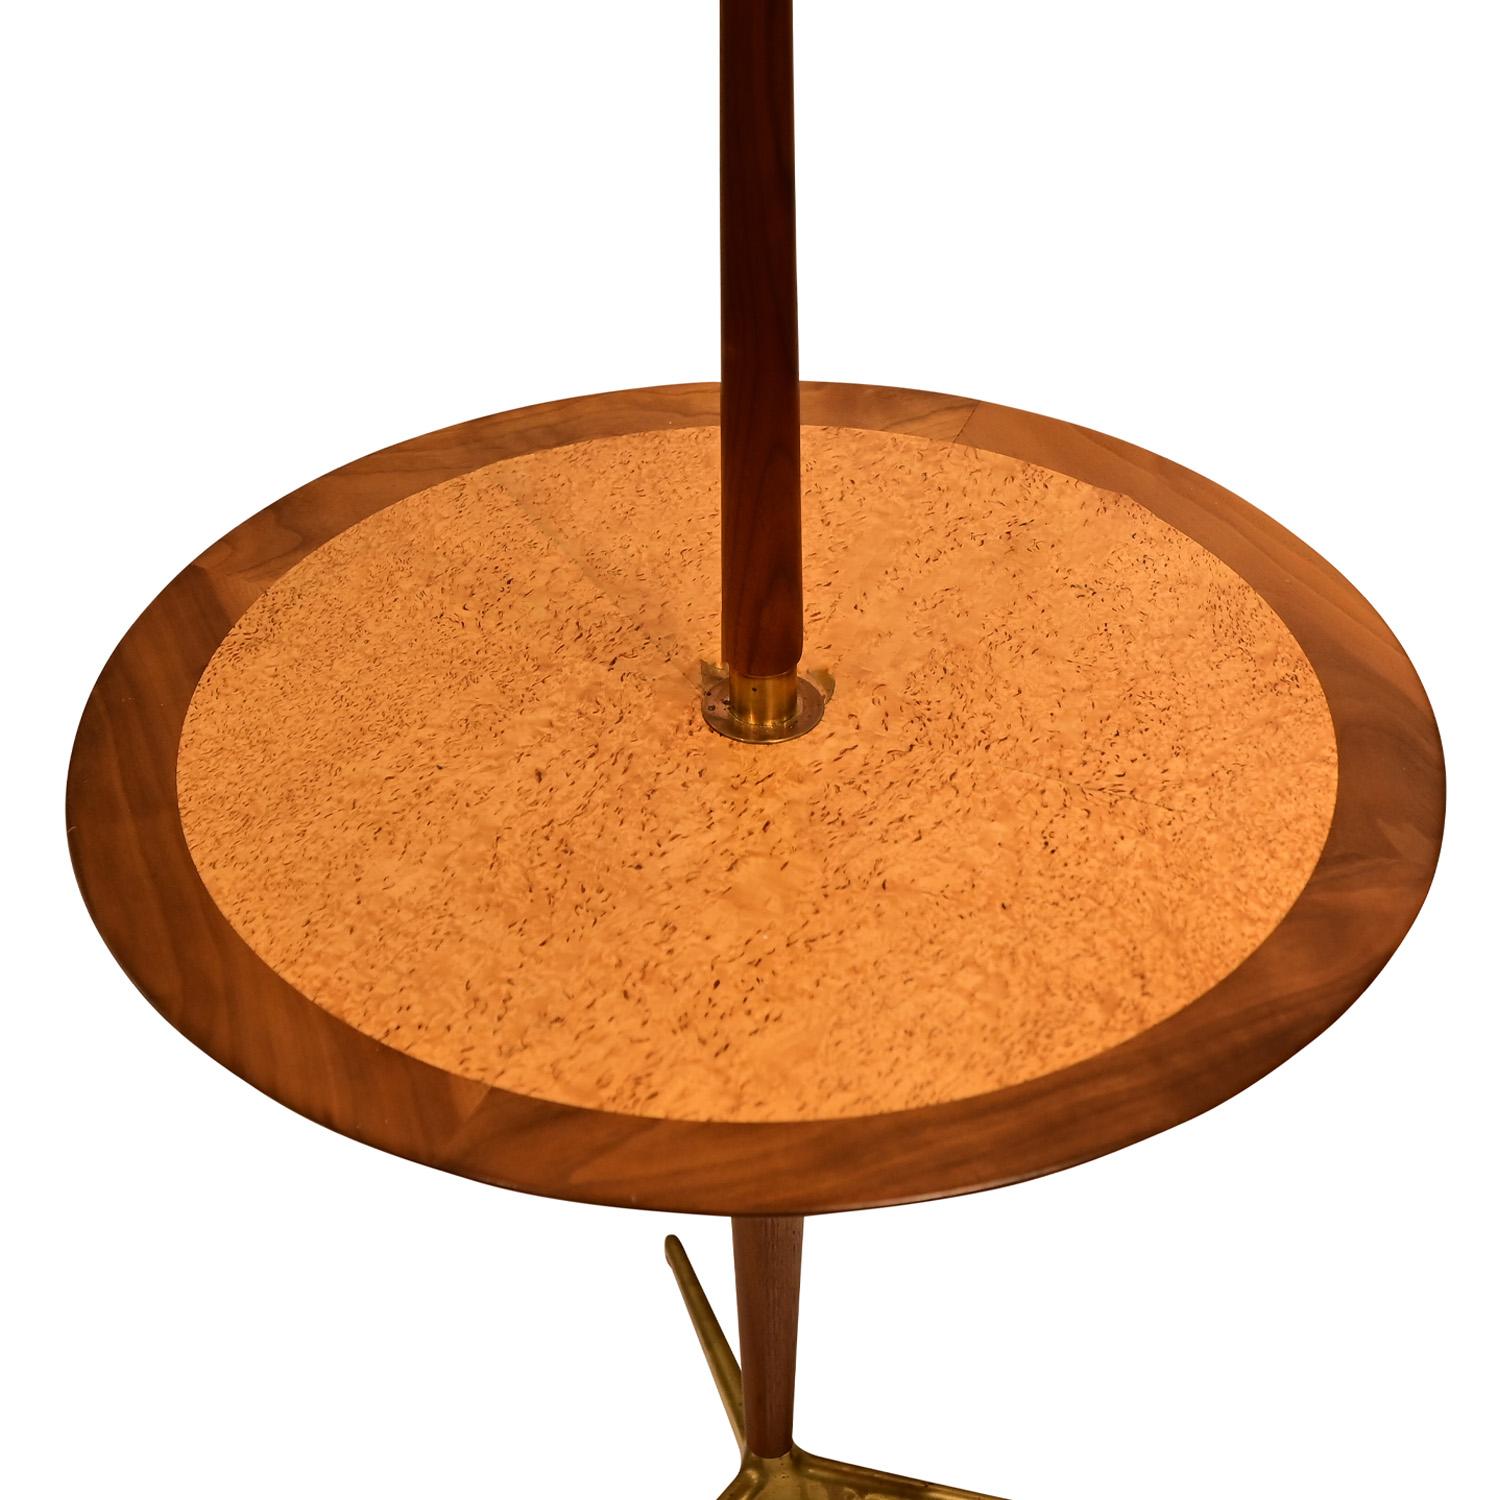 Edward Wormley for Dunbar Floor Lamp with Incorporated Table 1954 (Signed) In Excellent Condition For Sale In New York, NY